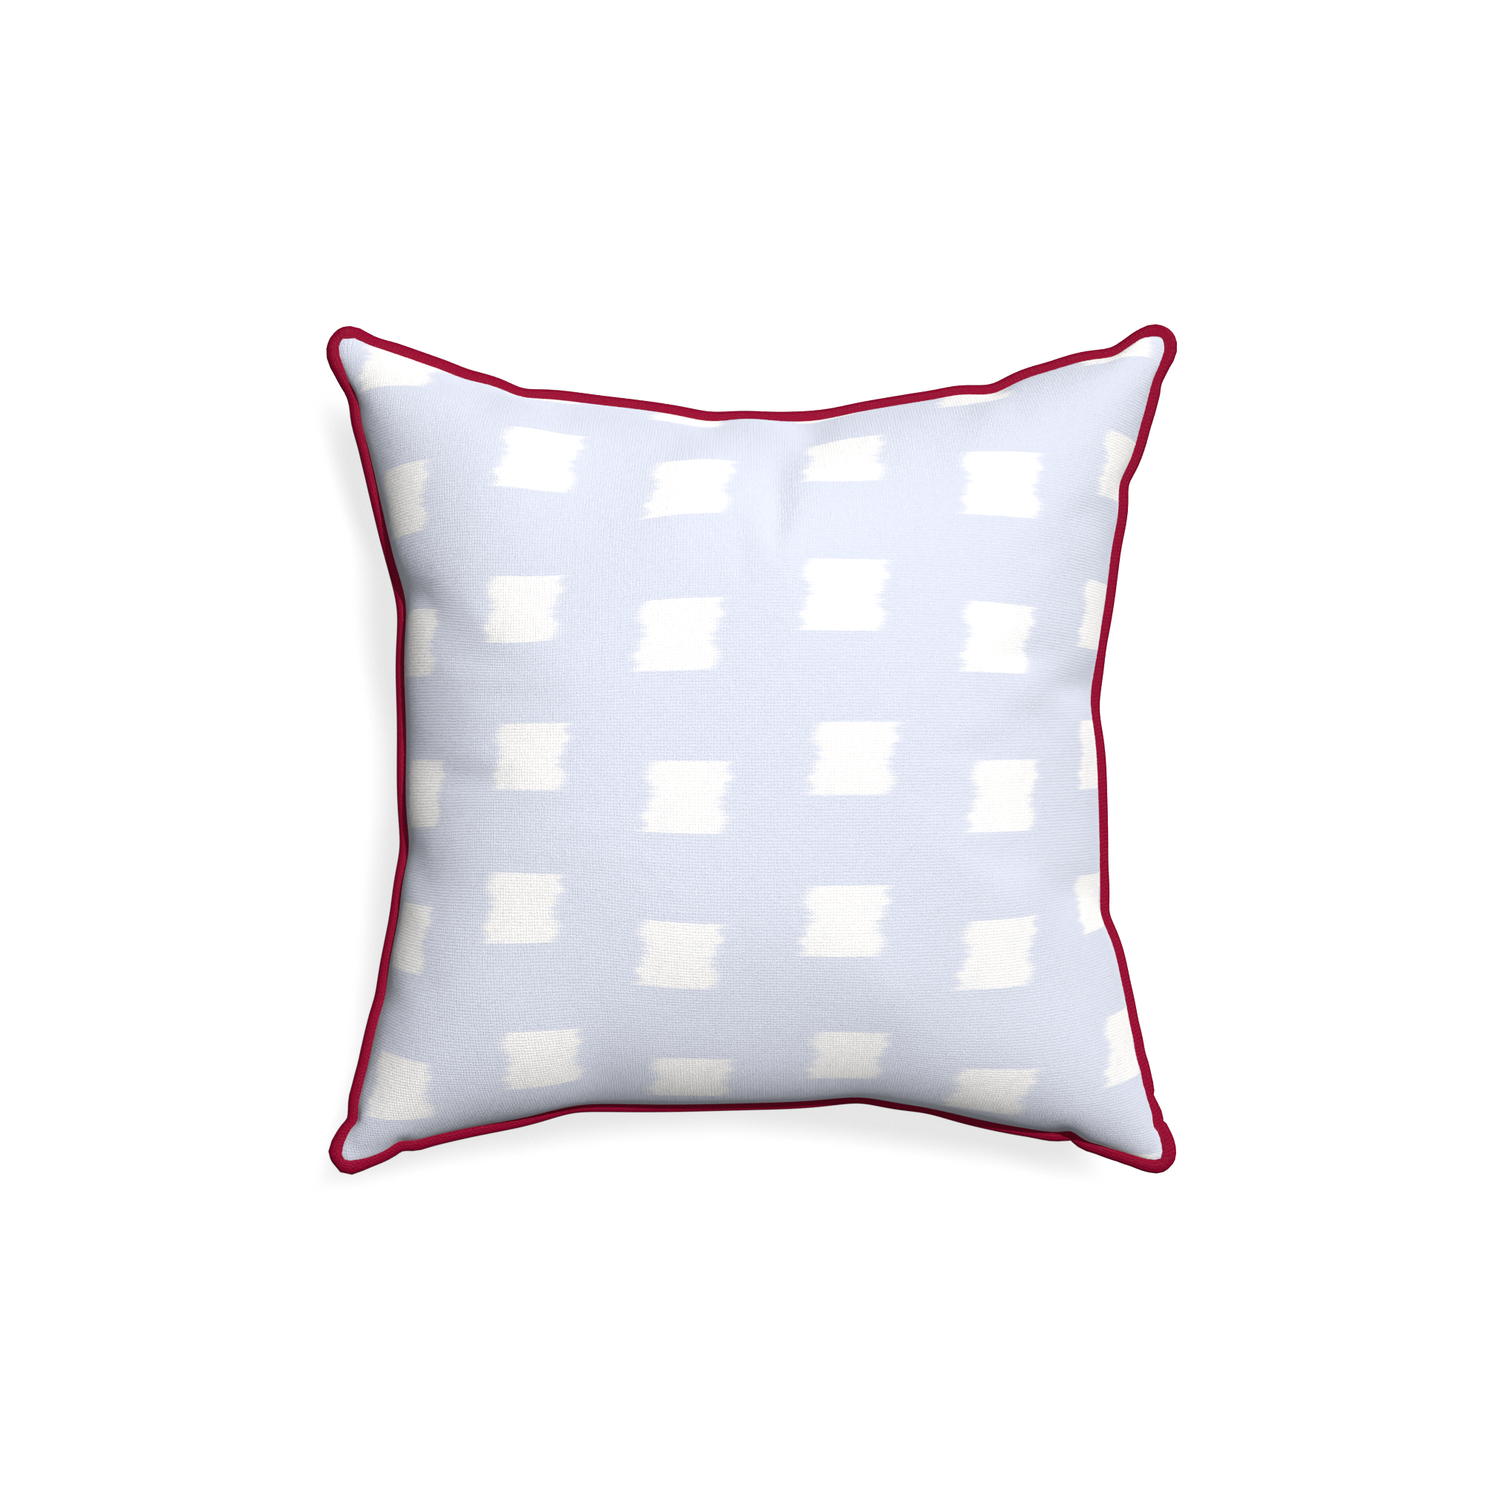 18-square denton custom sky blue patternpillow with raspberry piping on white background